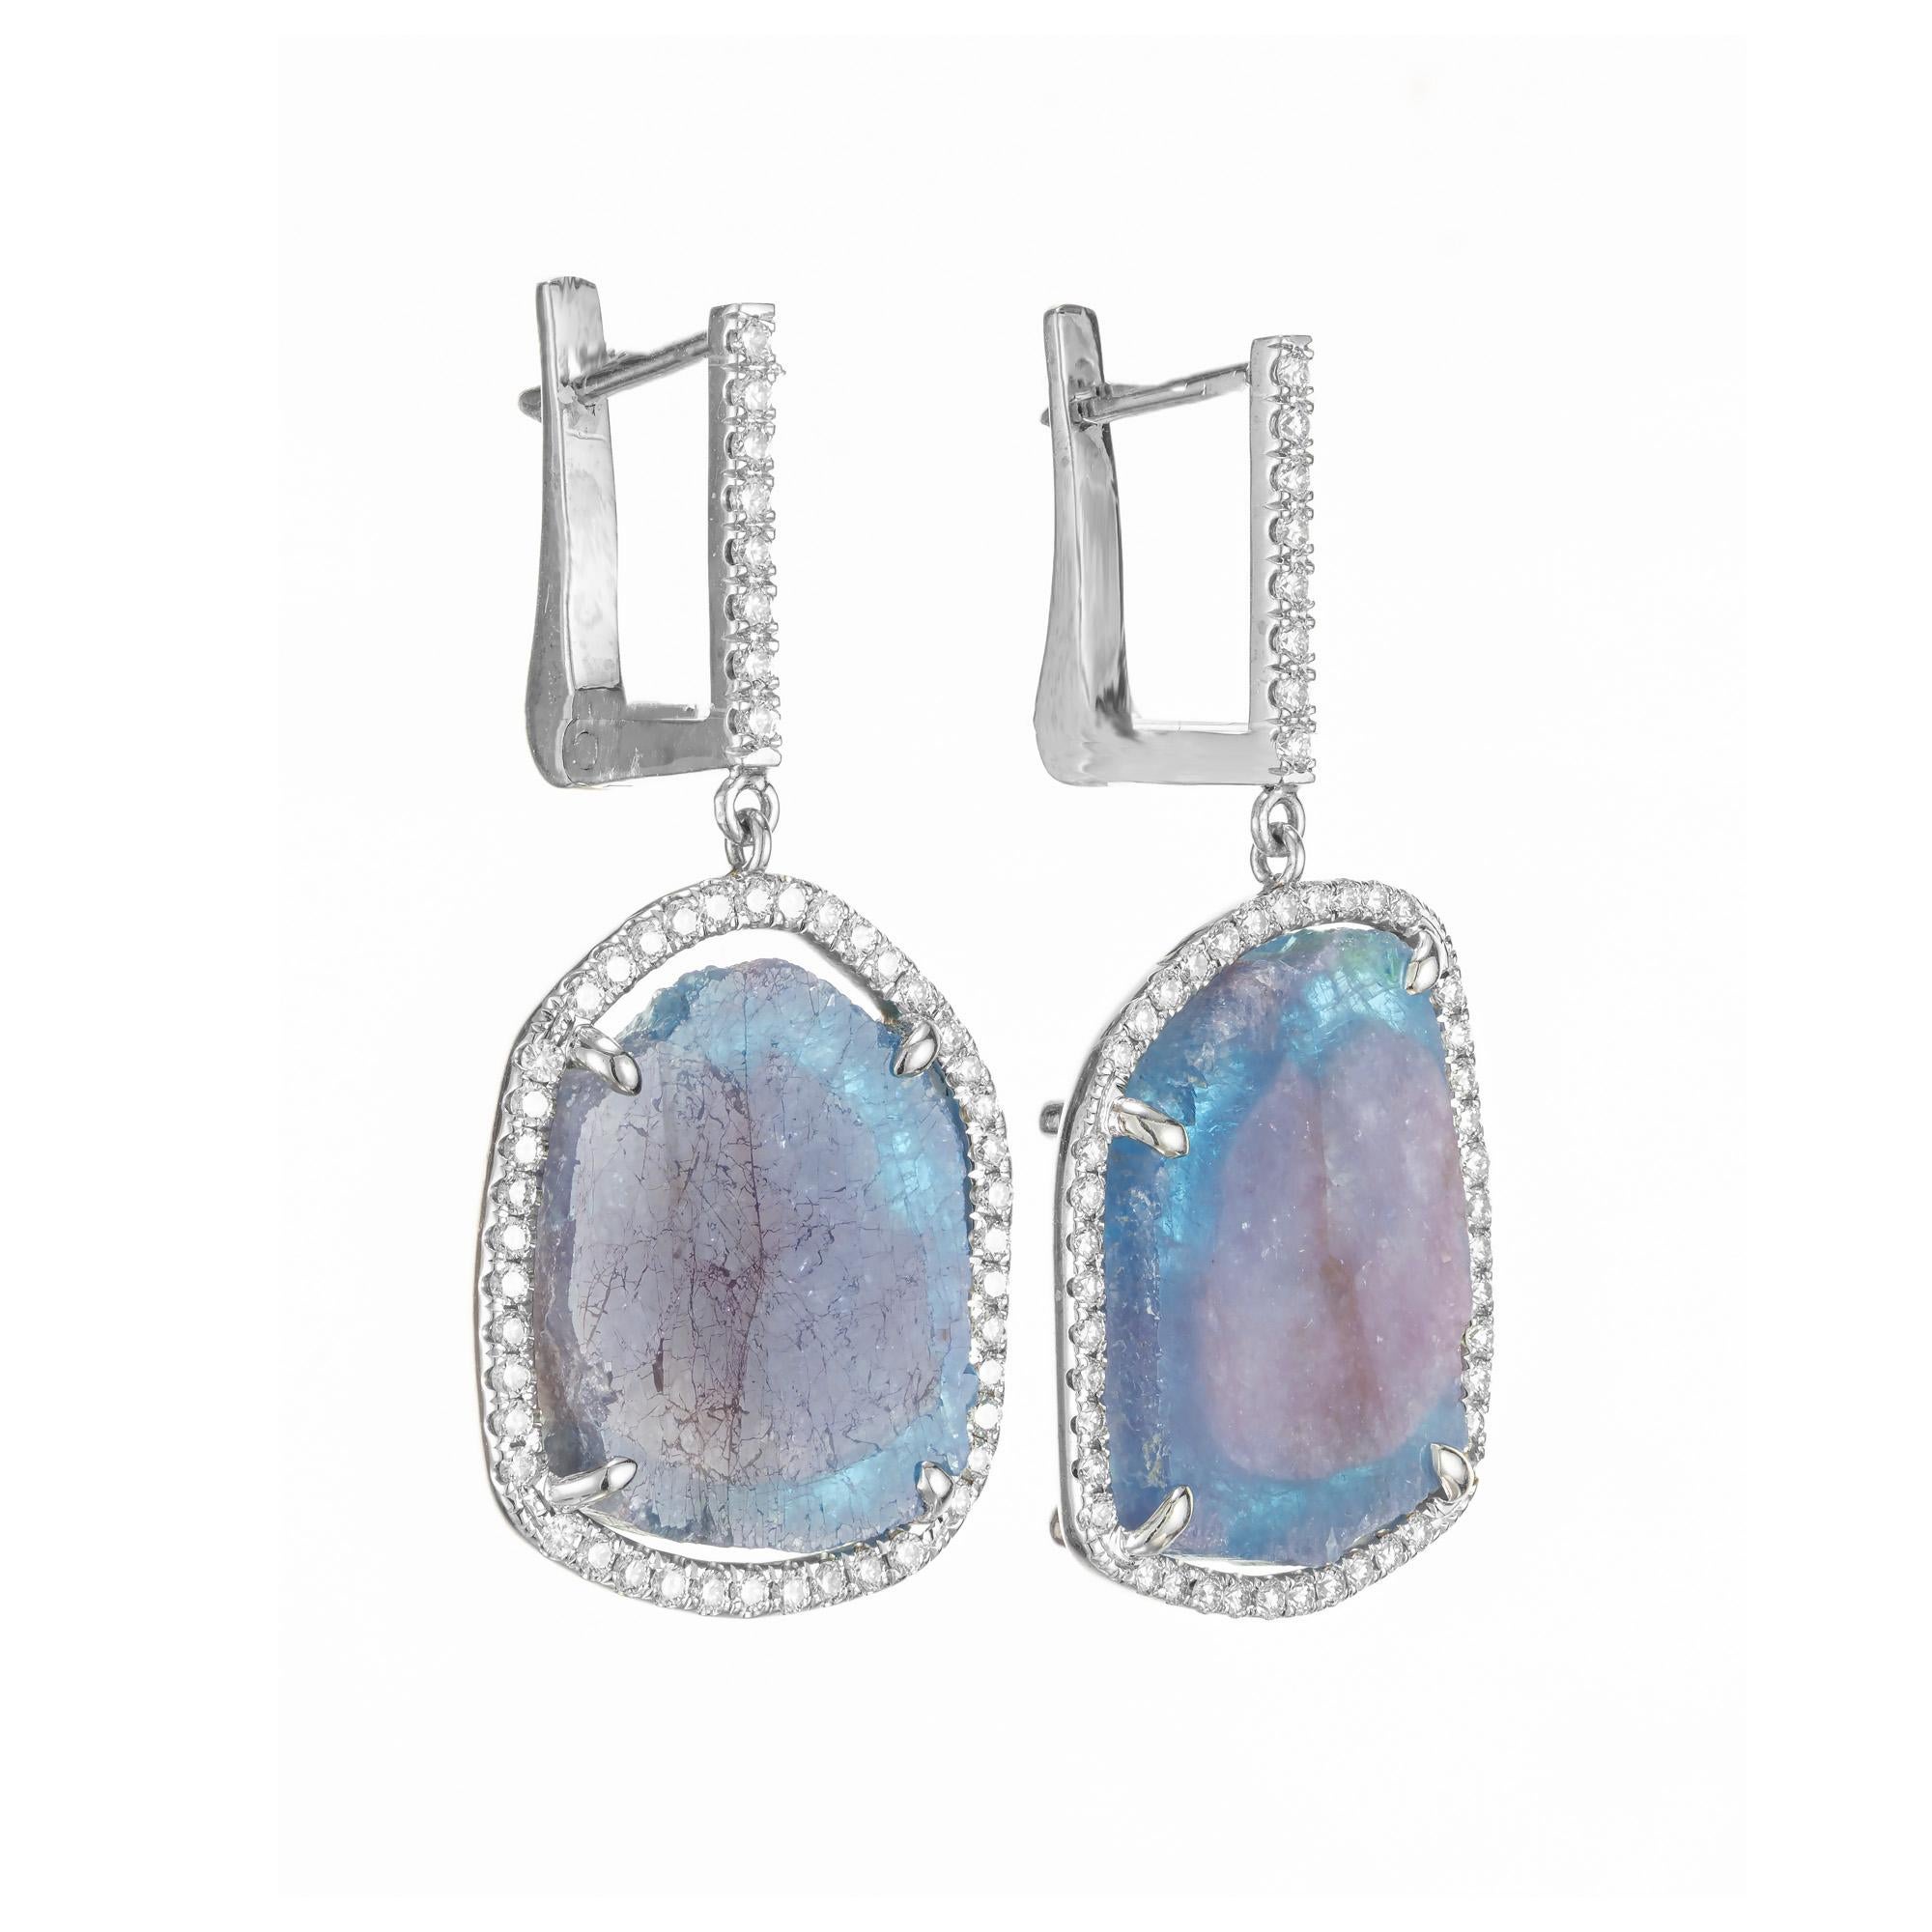 Tourmaline and diamond halo dangle earrings. AGL certified natural no heat Paraiba Brazilian Tourmaline crystal slices with pink, purple and blue translucent colors.  These unique uncut tourmalines are set in 18k white gold diamond halo settings